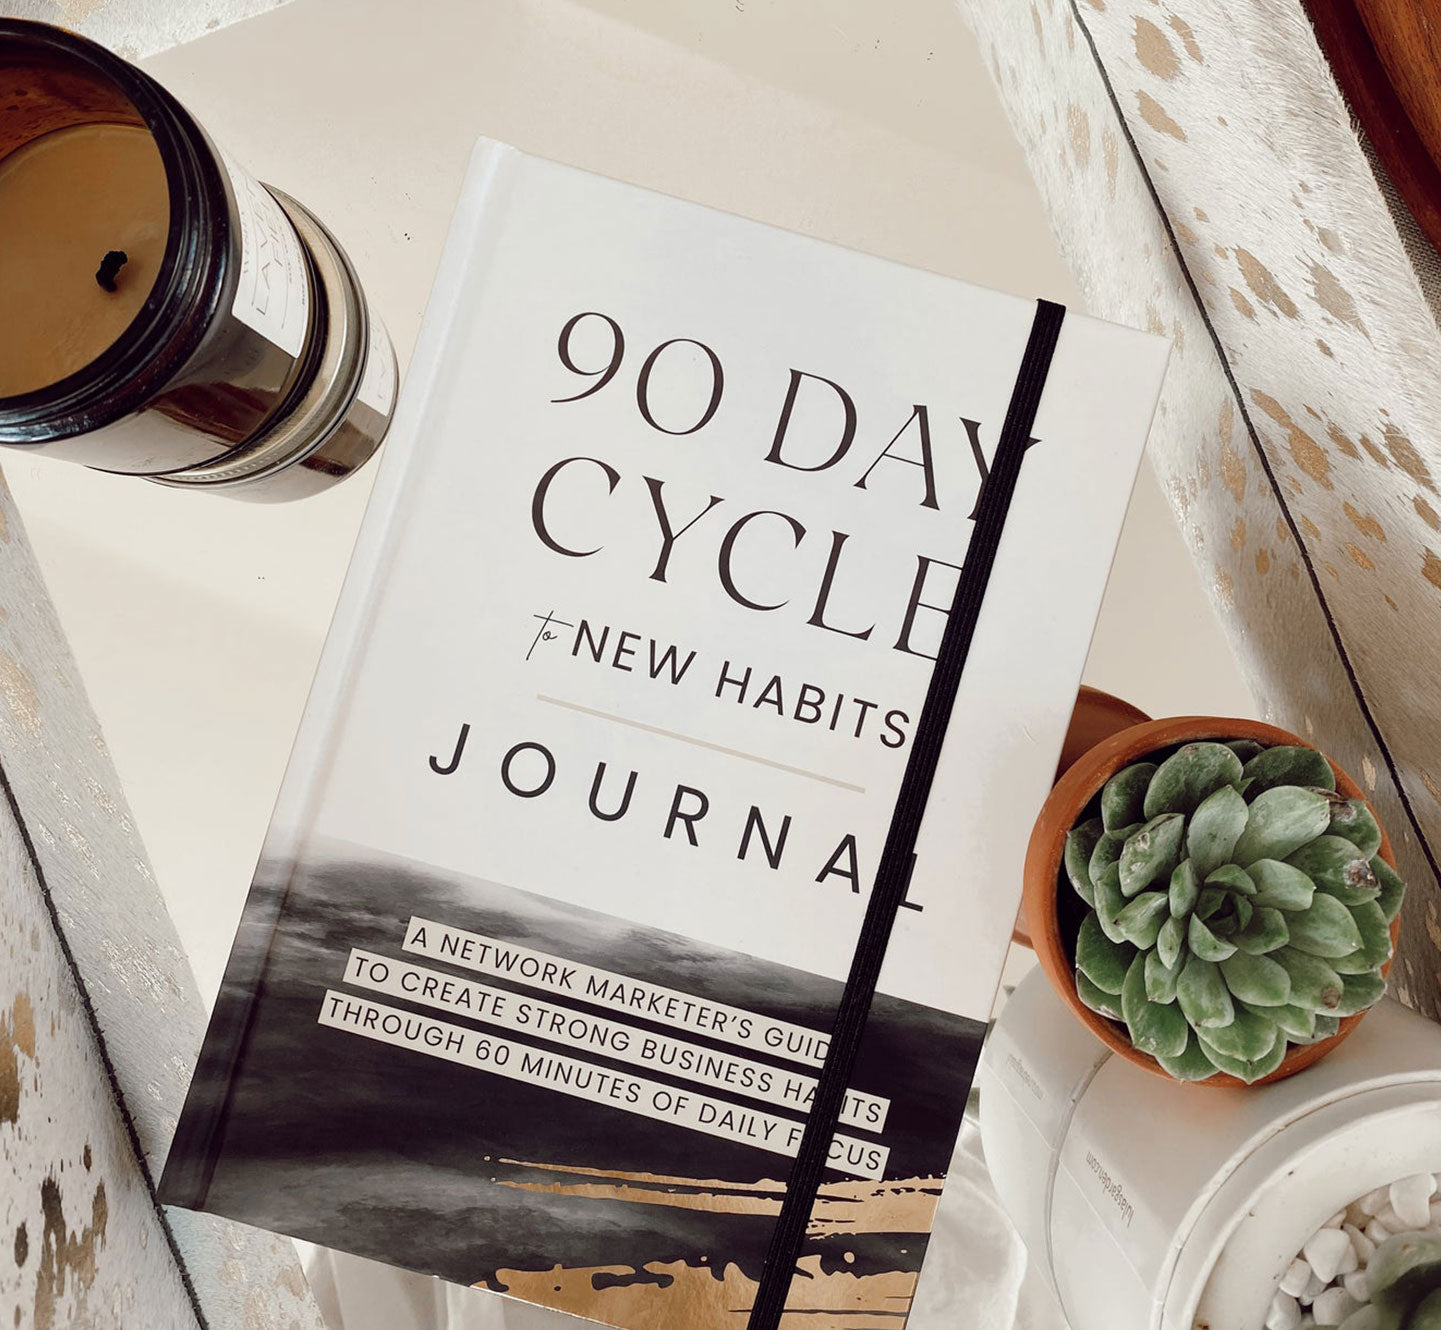 90 Day Cycle to New Habits Journal - Black & White